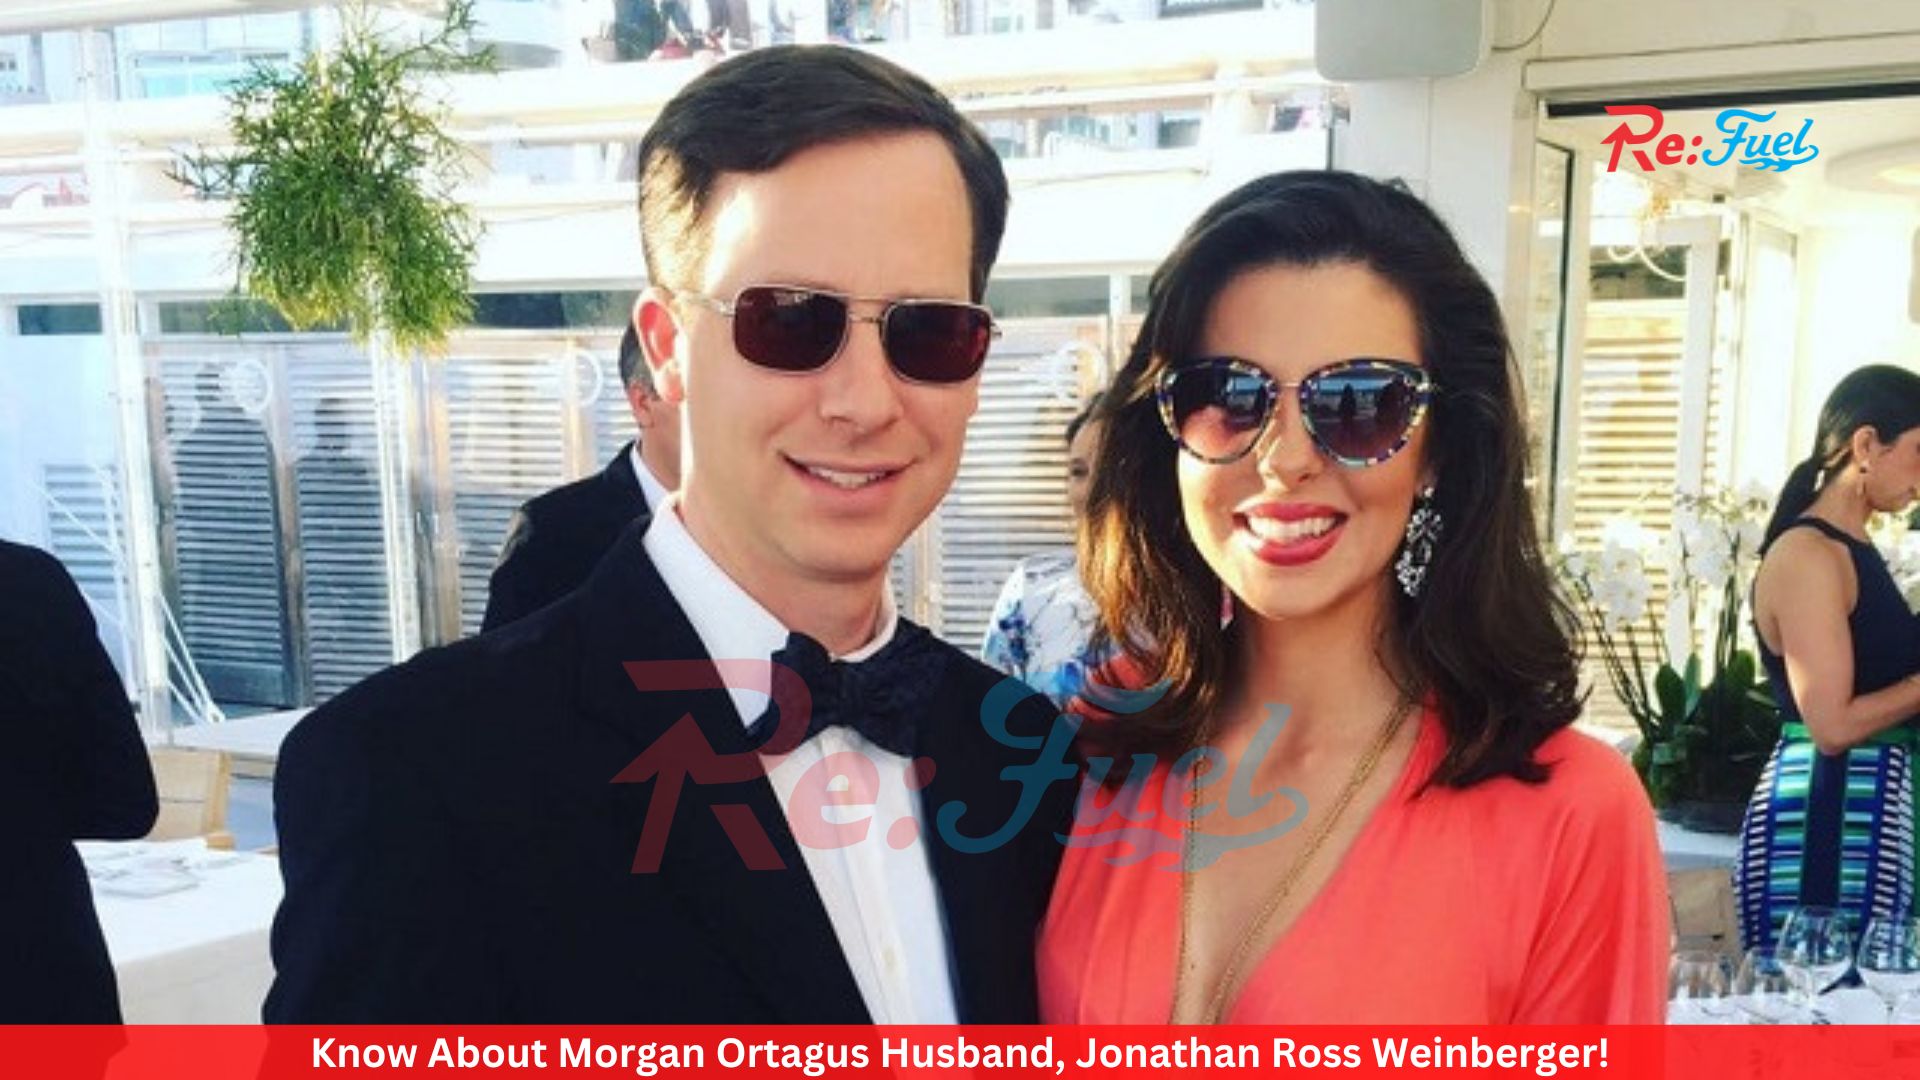 Know About Morgan Ortagus Husband, Jonathan Ross Weinberger!